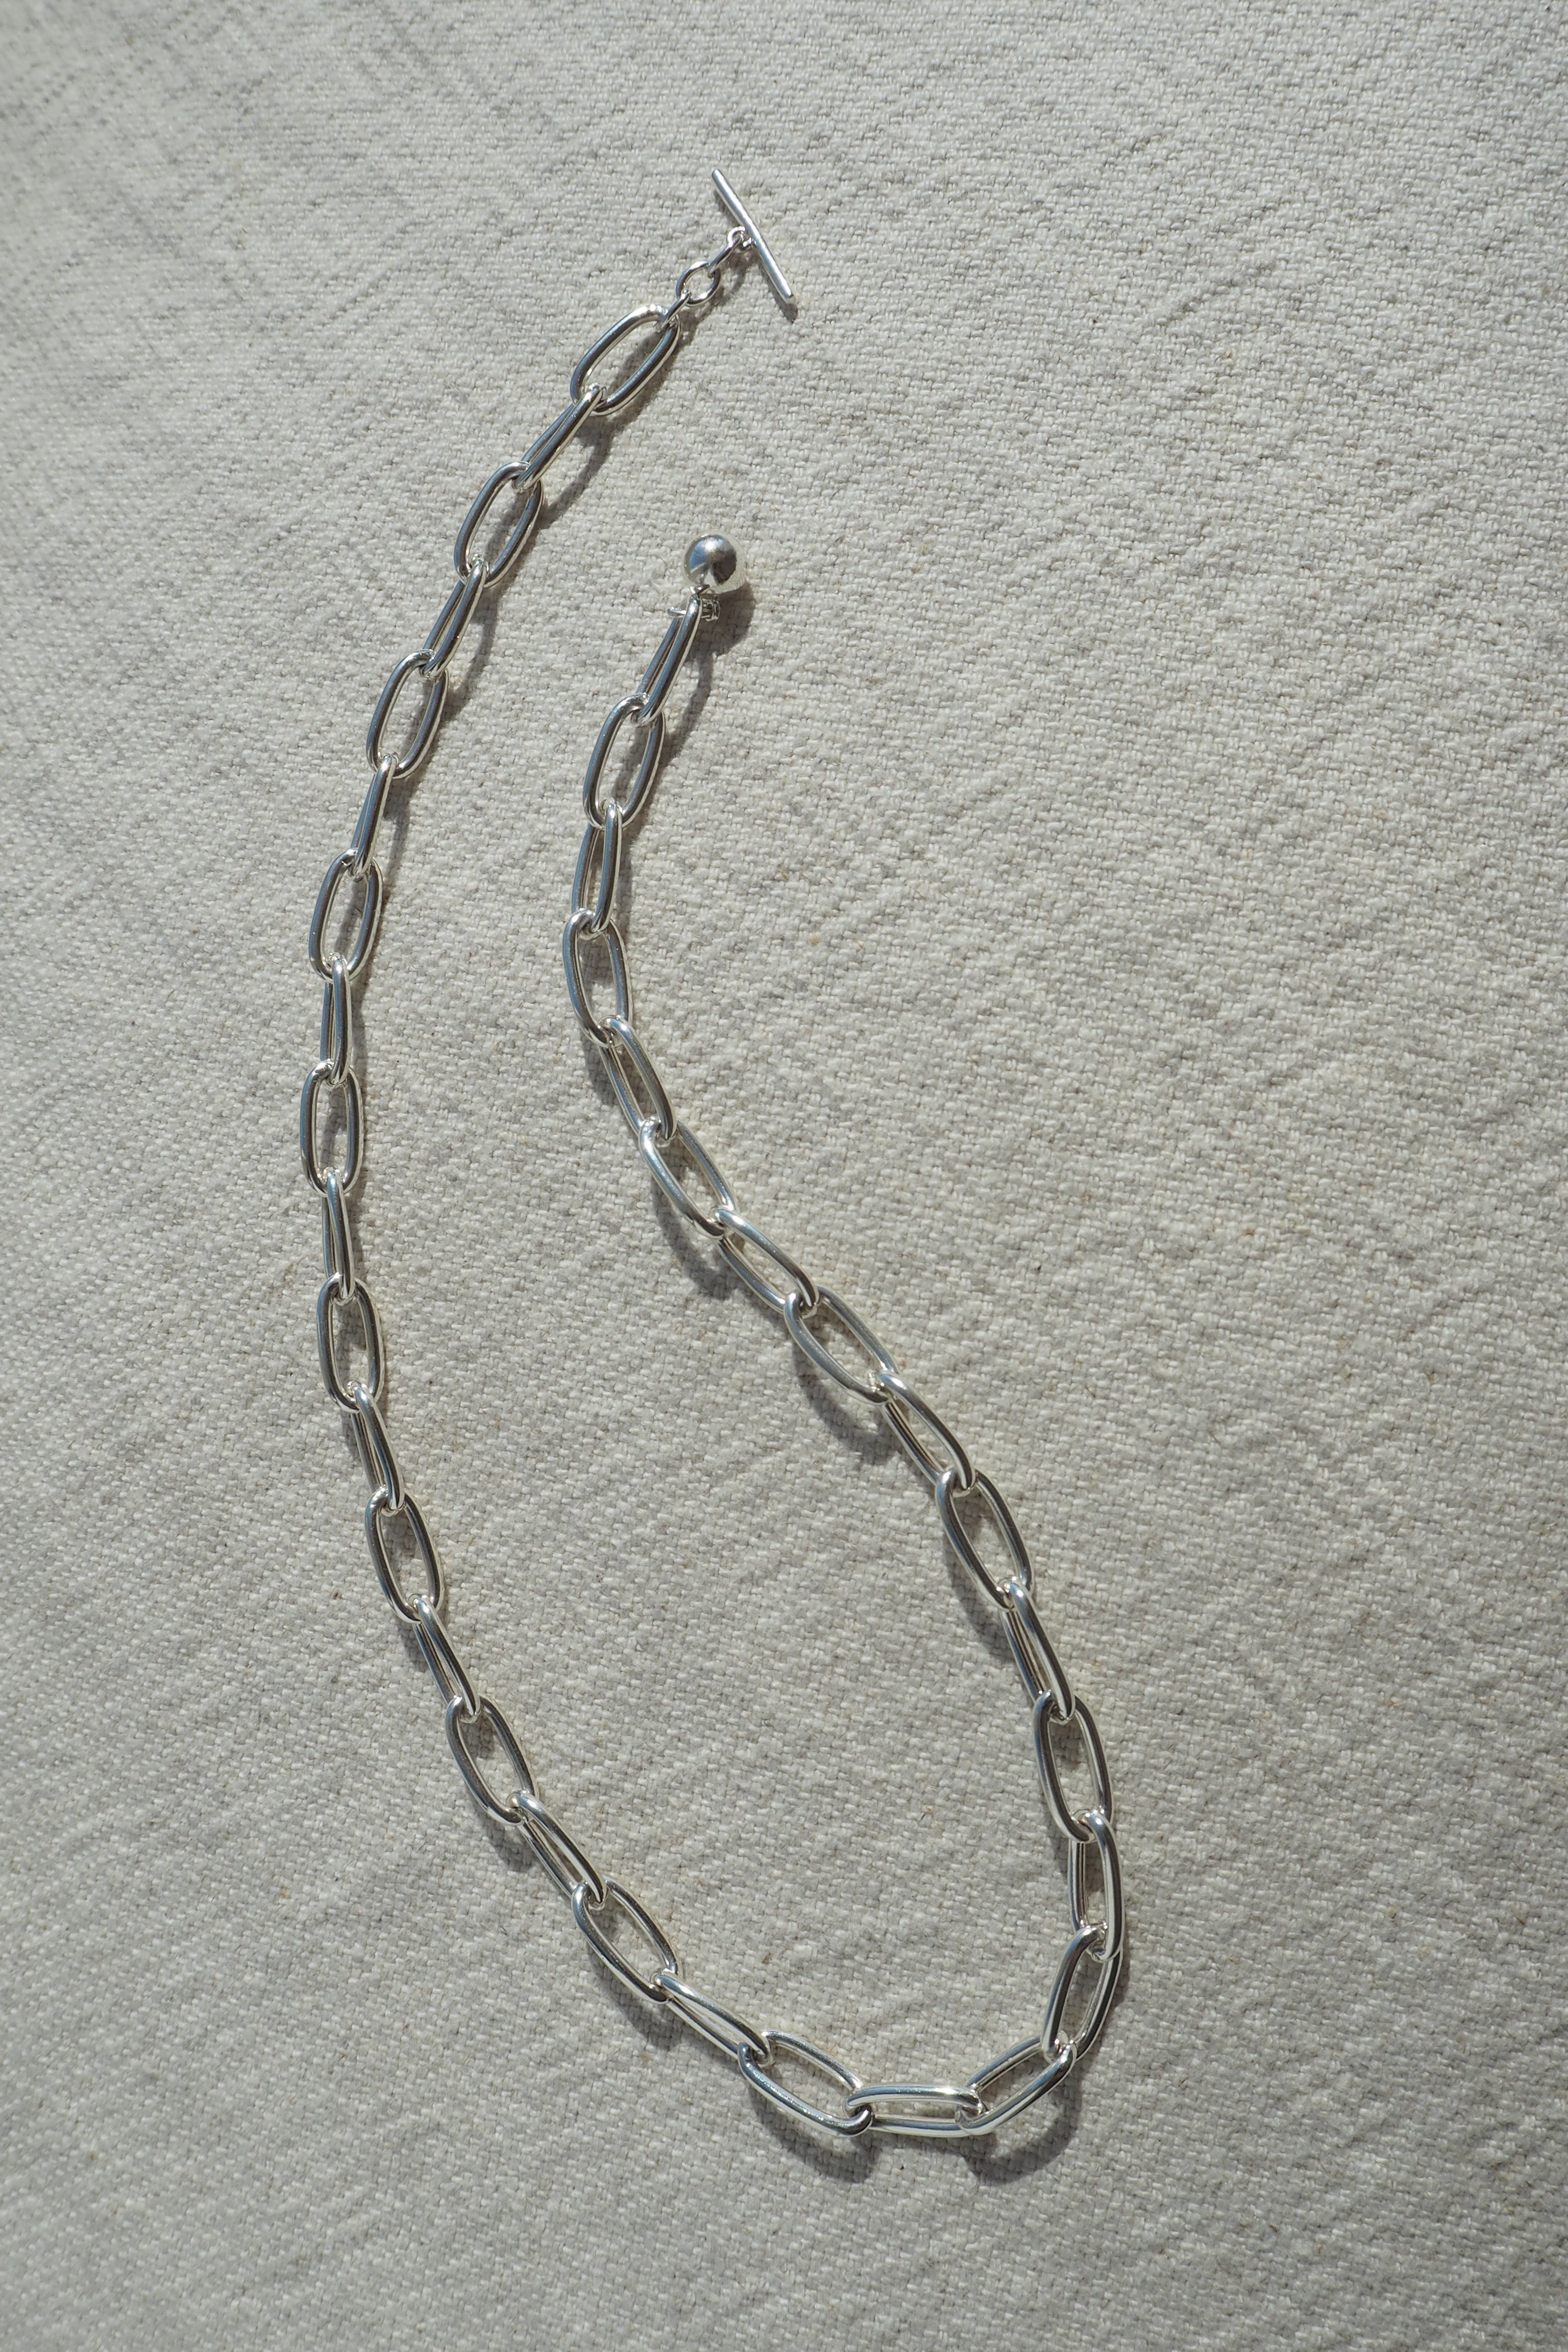 OvalChain Free Necklace